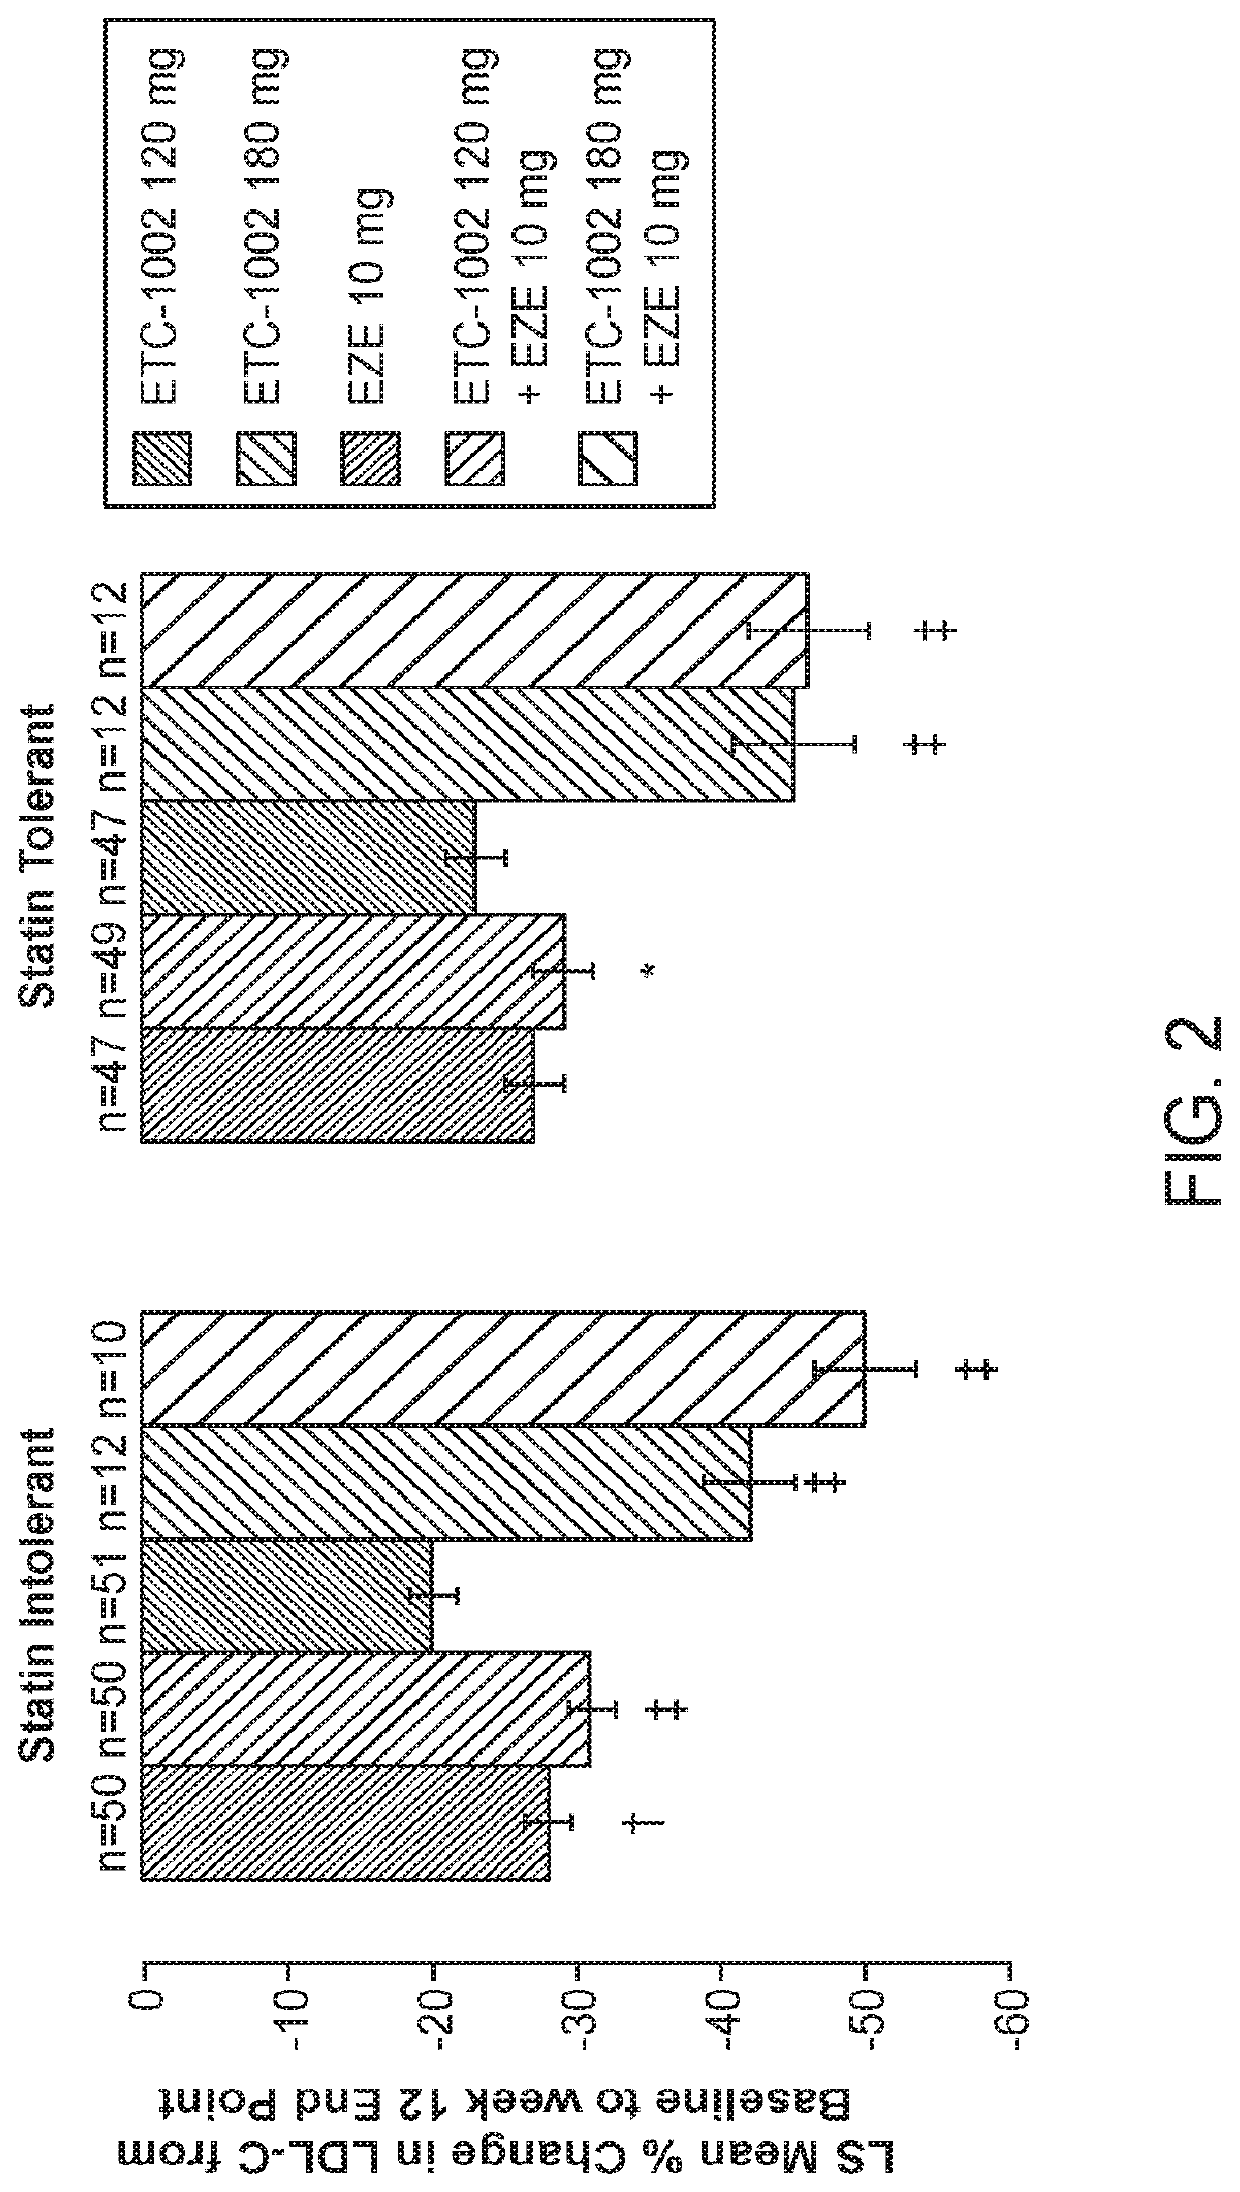 Fixed dose combinations and formulations comprising etc1002 and ezetimibe and methods of treating or reducing the risk of cardiovascular disease